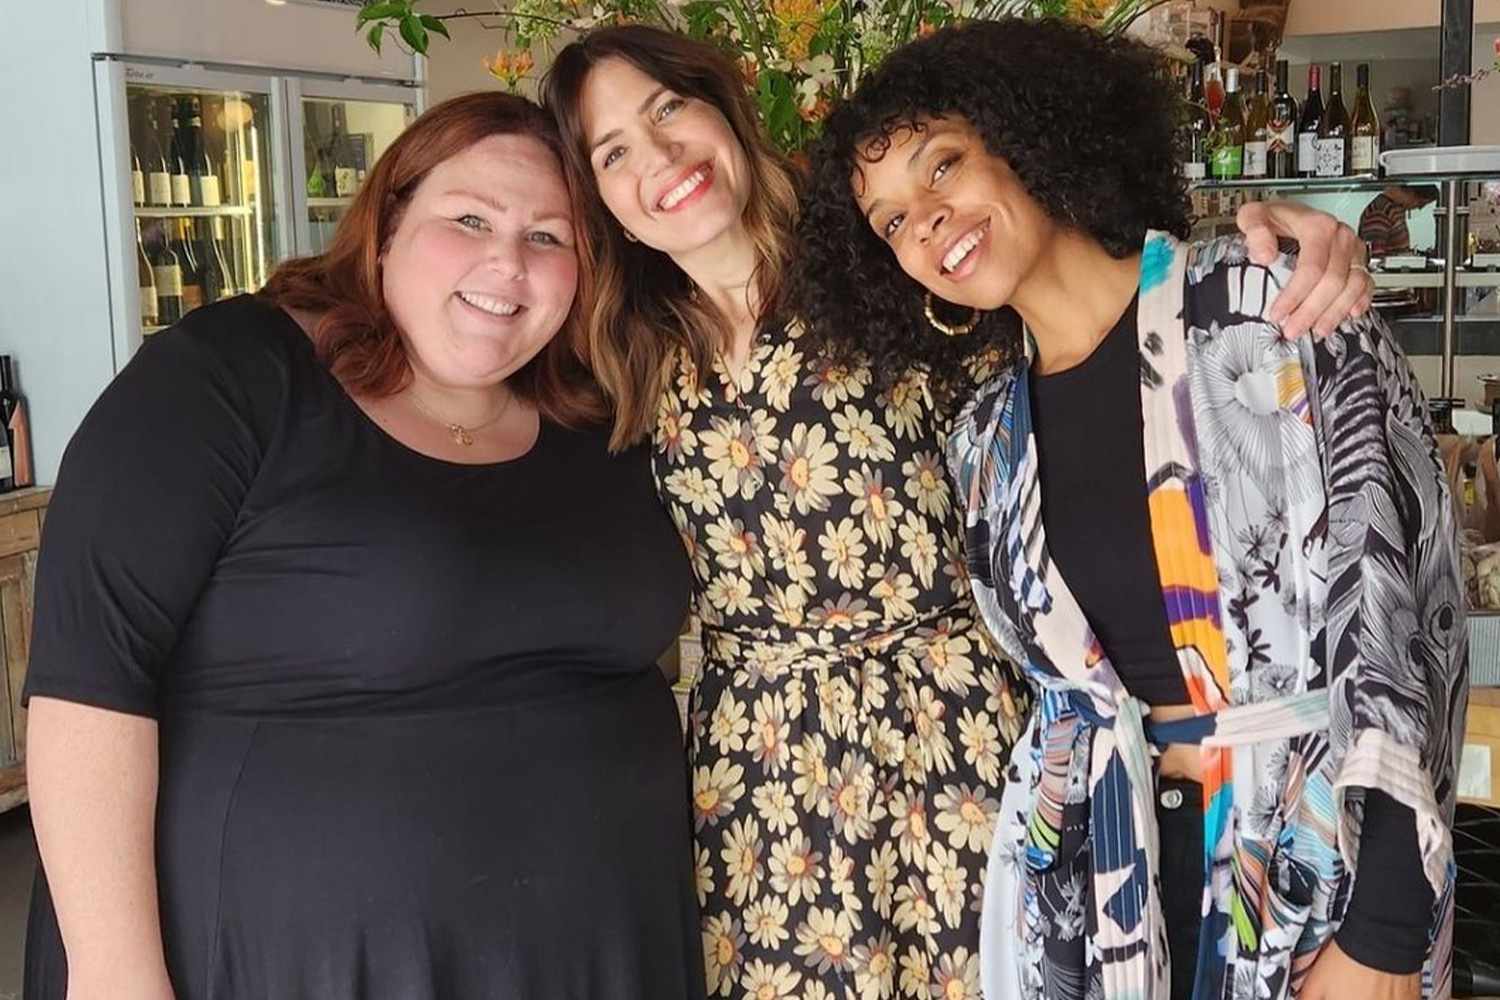 Mandy Moore, Chrissy Metz, and Susan Kelechi Watson have 'This Is Us' reunion